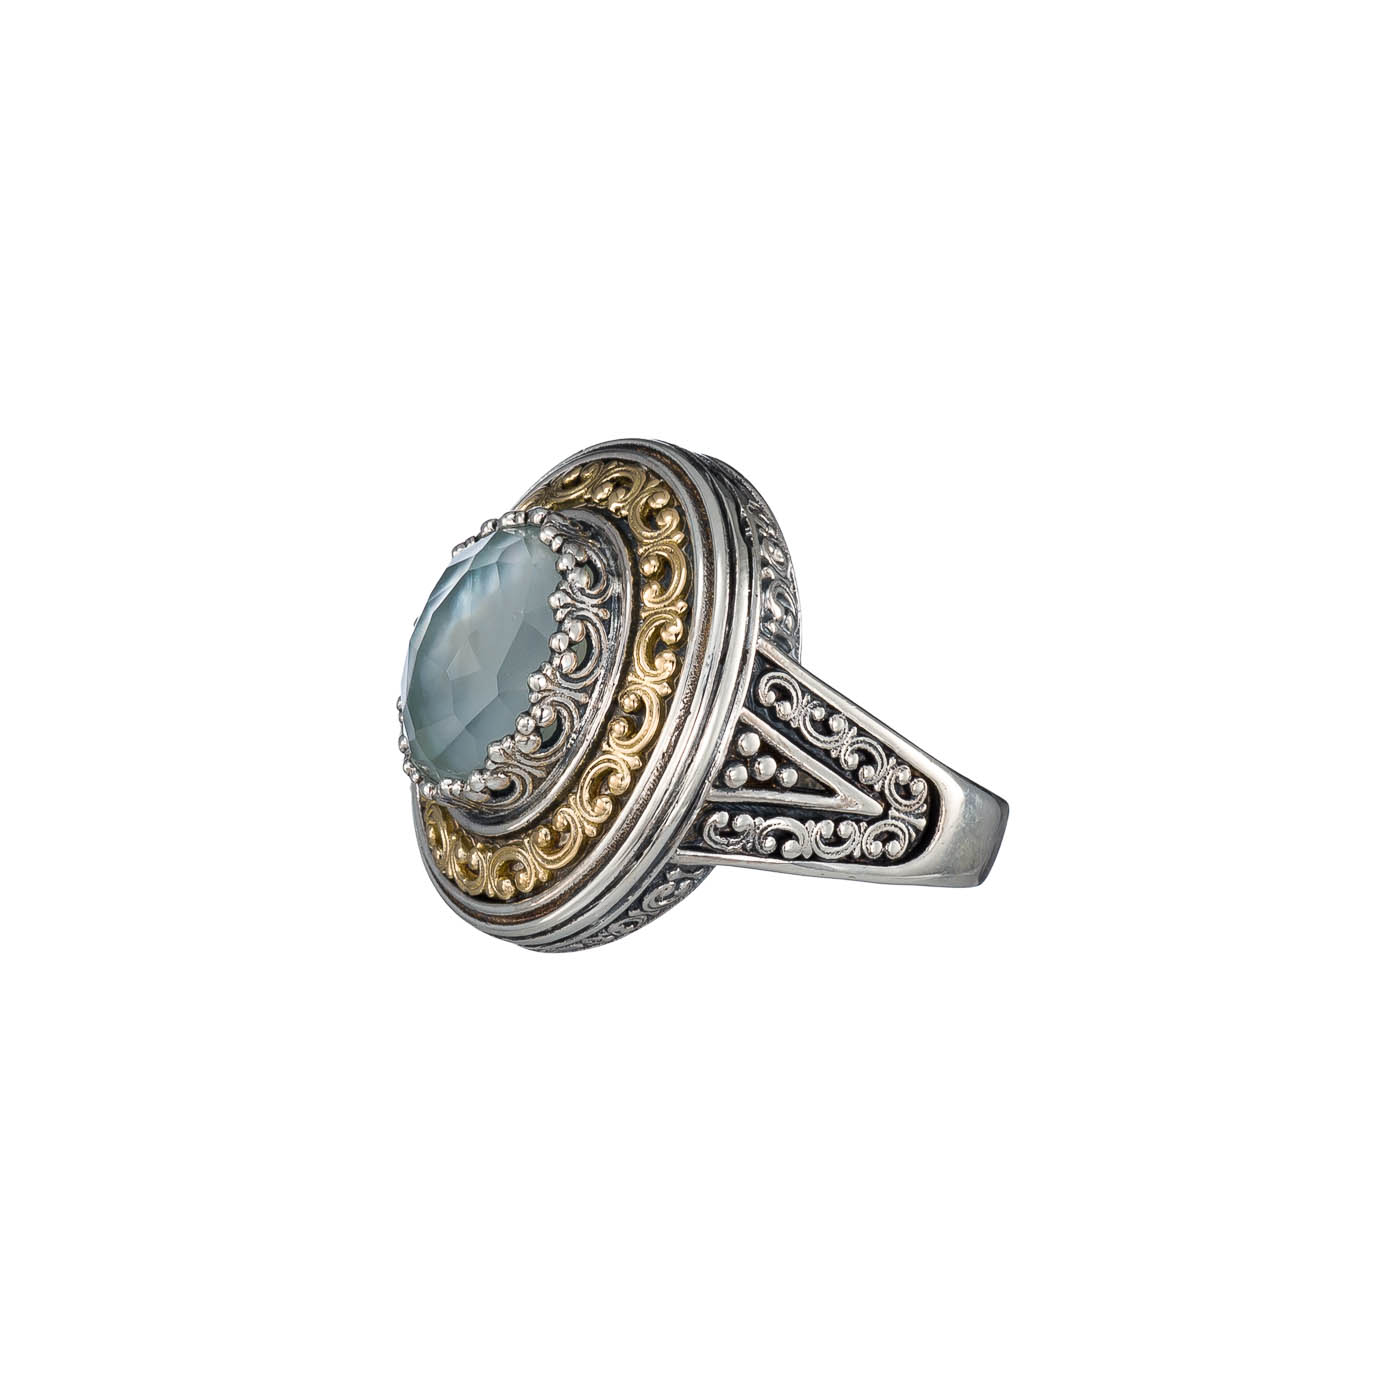 Iris oval ring in 18K Gold and Sterling Silver with doublet stone